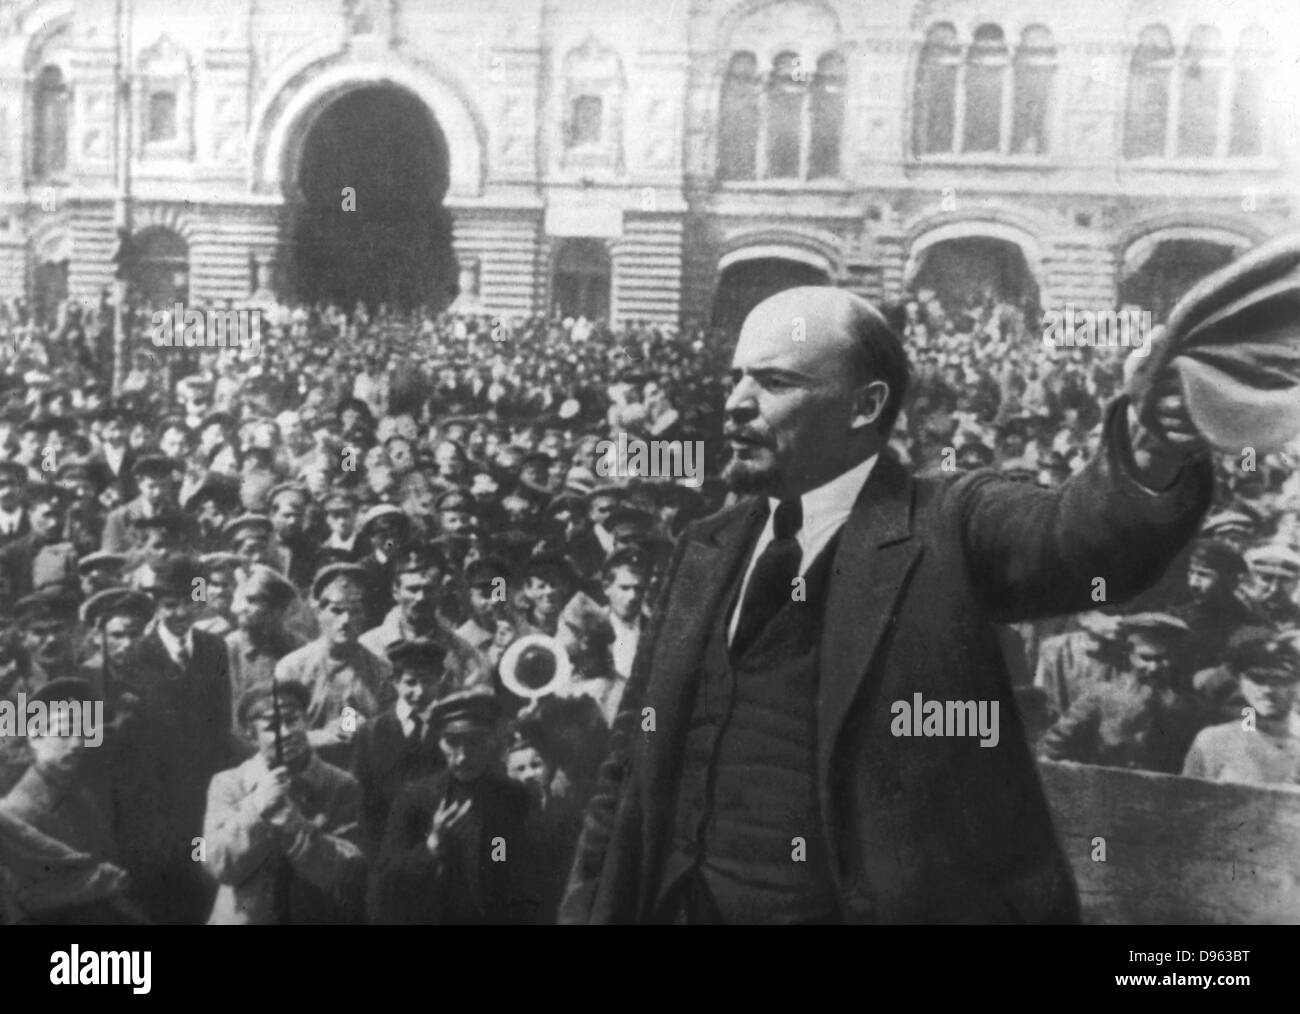 Russian Revolution, October 1917. Vladimir Ilyich Lenin (Ulyanov) 1870-1924 addressing the crowd in Red Square, Moscow.  Photograph. Stock Photo